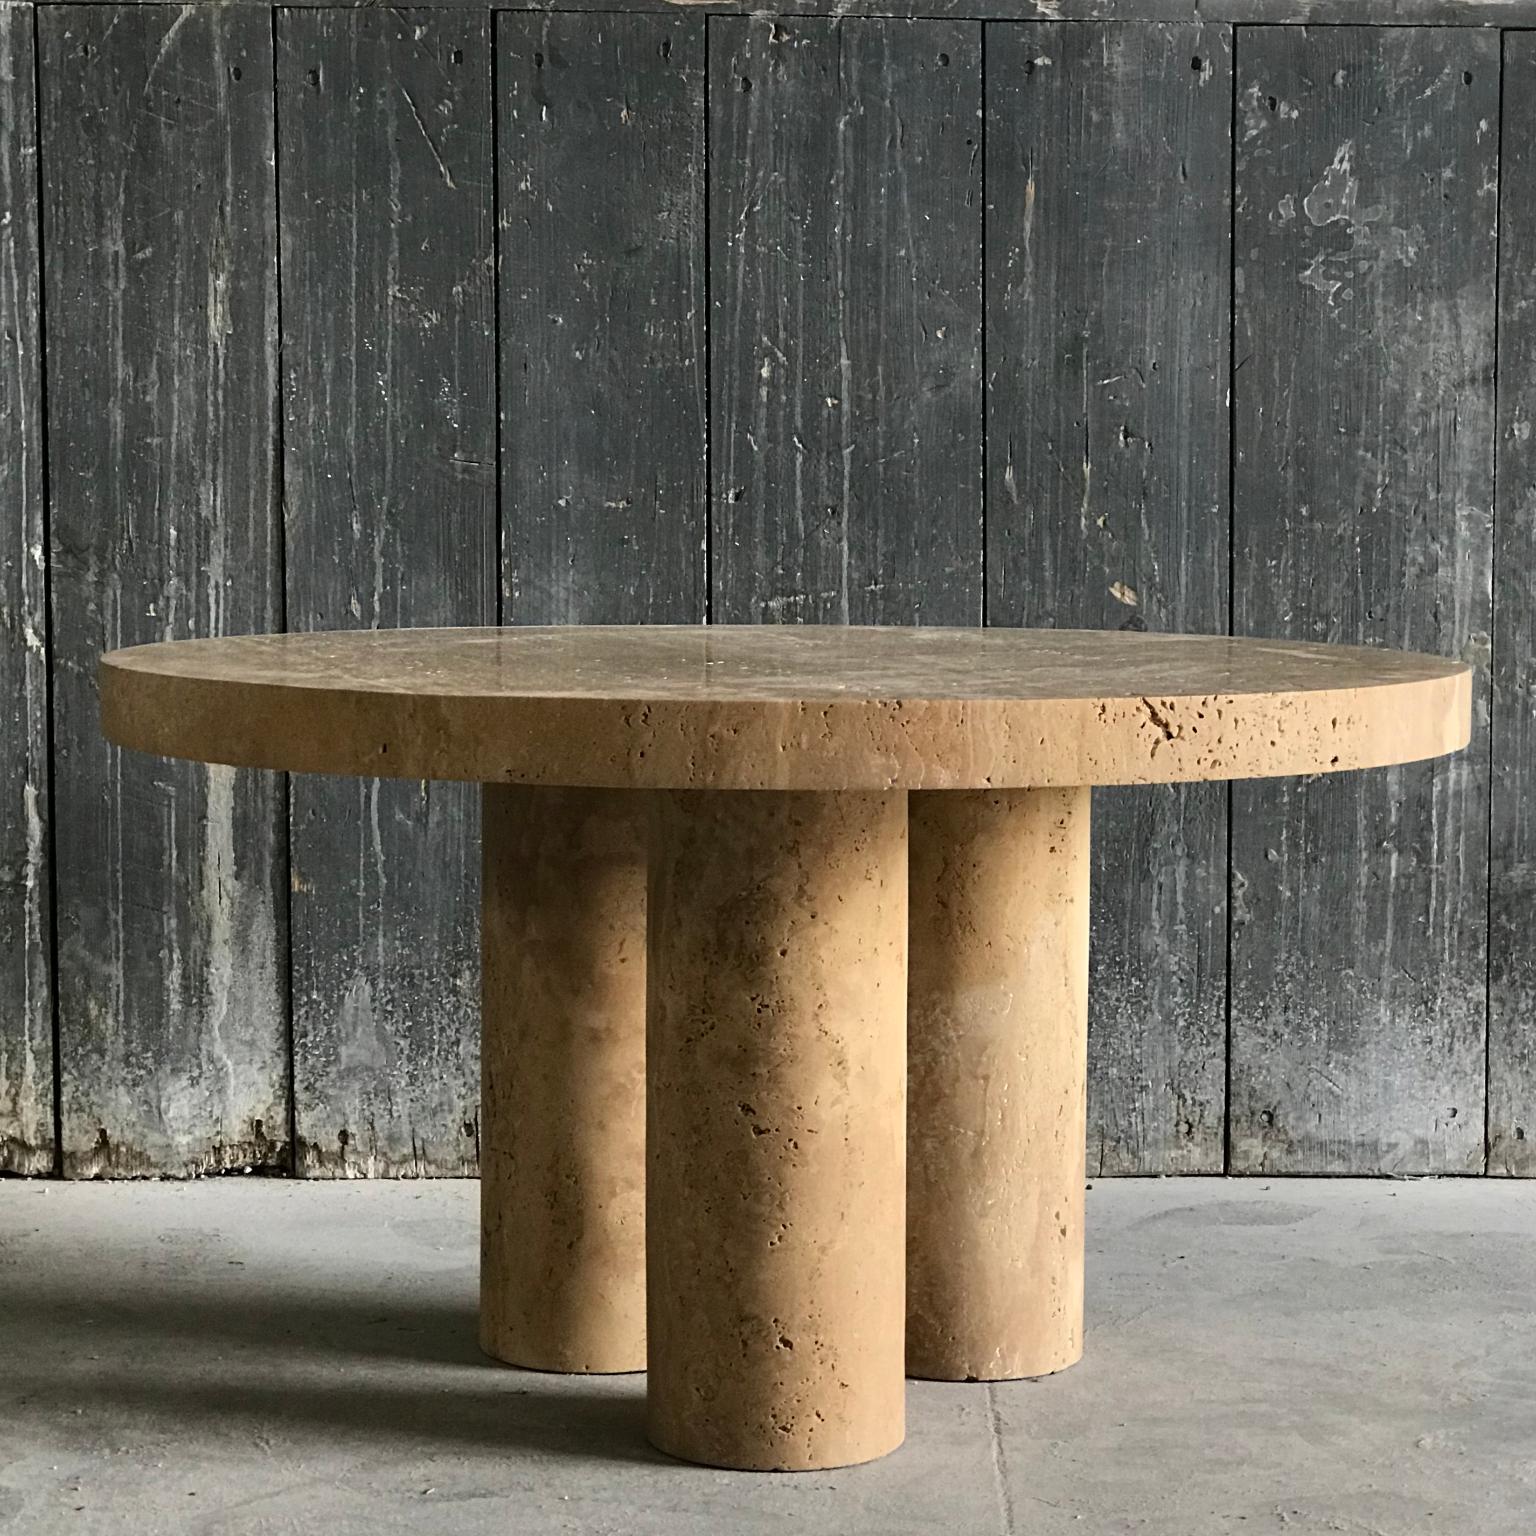 Sculptural Cuddle coffee table 54 by Pietro Franceschini
Dimensions: D 54 x H 36 cm
Materials: Travertine

Pietro Franceschini is an architect and designer based in New York and Florence. He was educated in Italy, Portugal and United States.